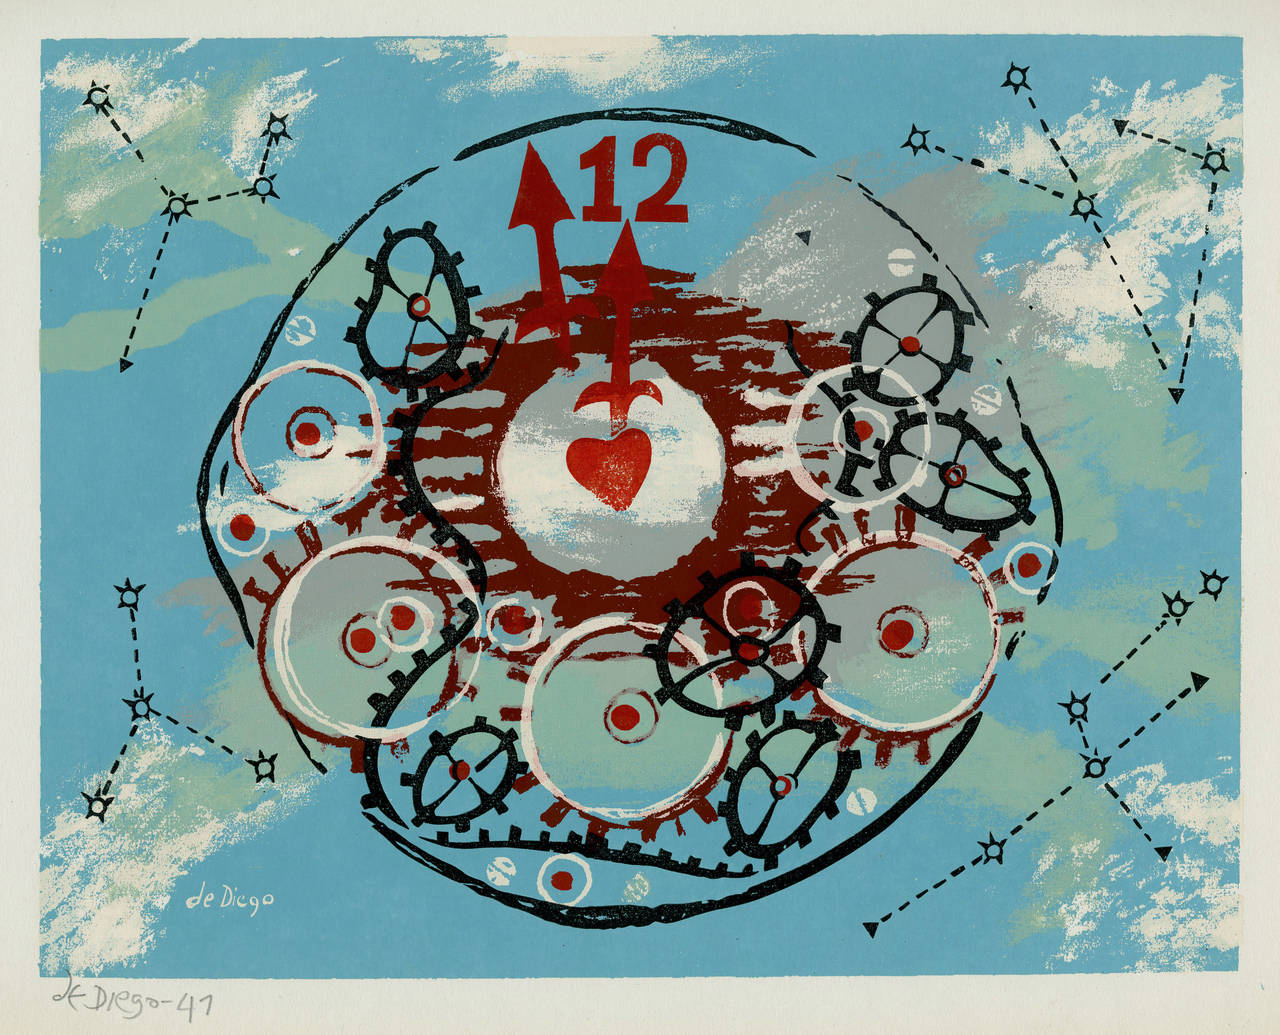 Julio de Diego Abstract Print - "Love That Makes the World Go Round"